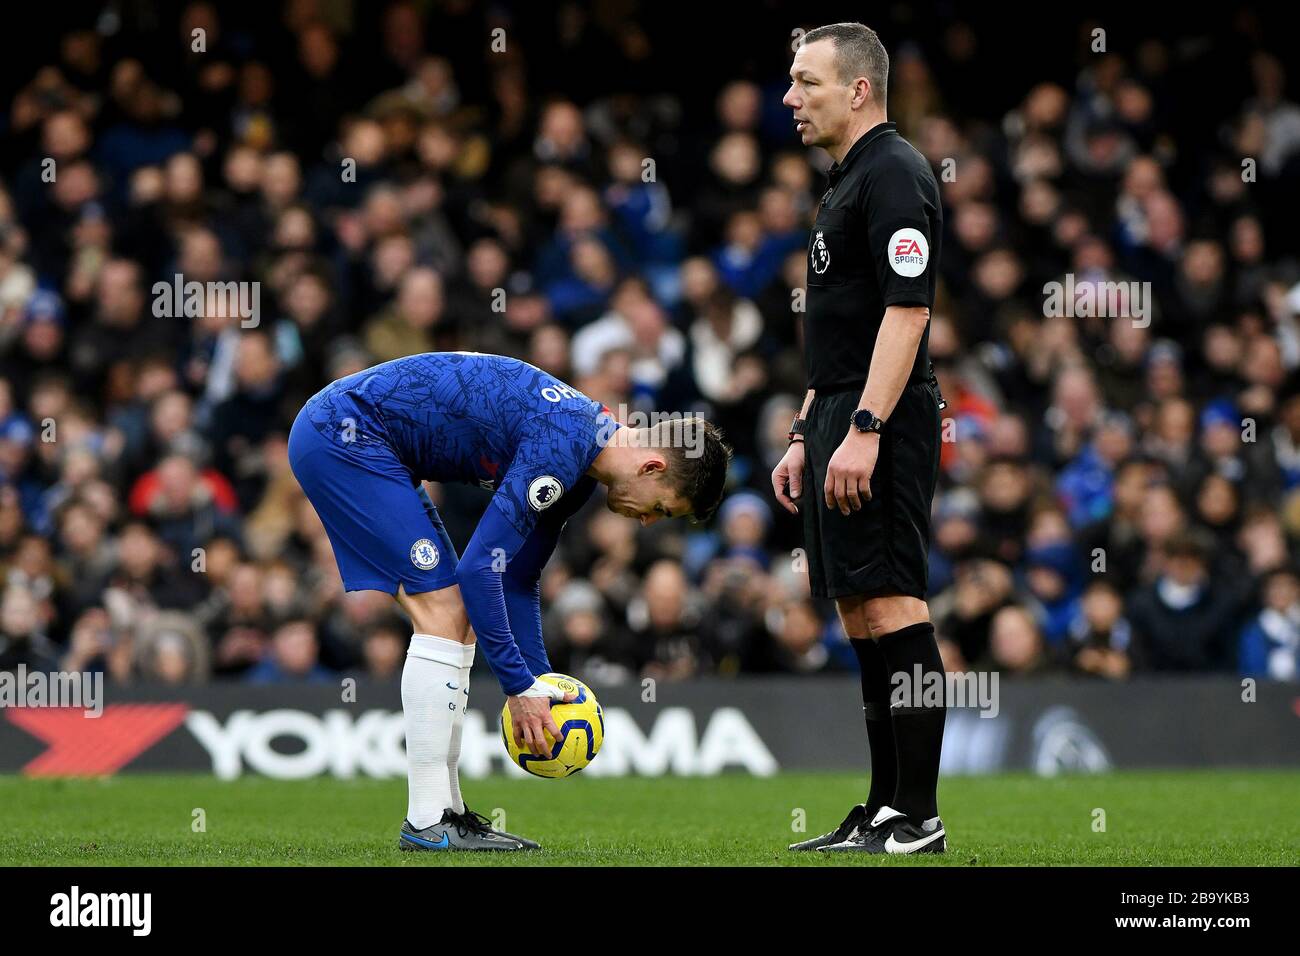 Jorginho of Chelsea prepares to take a penalty as Referee,   Kevin Friend looks on - Chelsea v Burnley, Premier League, Stamford Bridge, London, UK - 11th January 2020  Editorial Use Only - DataCo restrictions apply Stock Photo